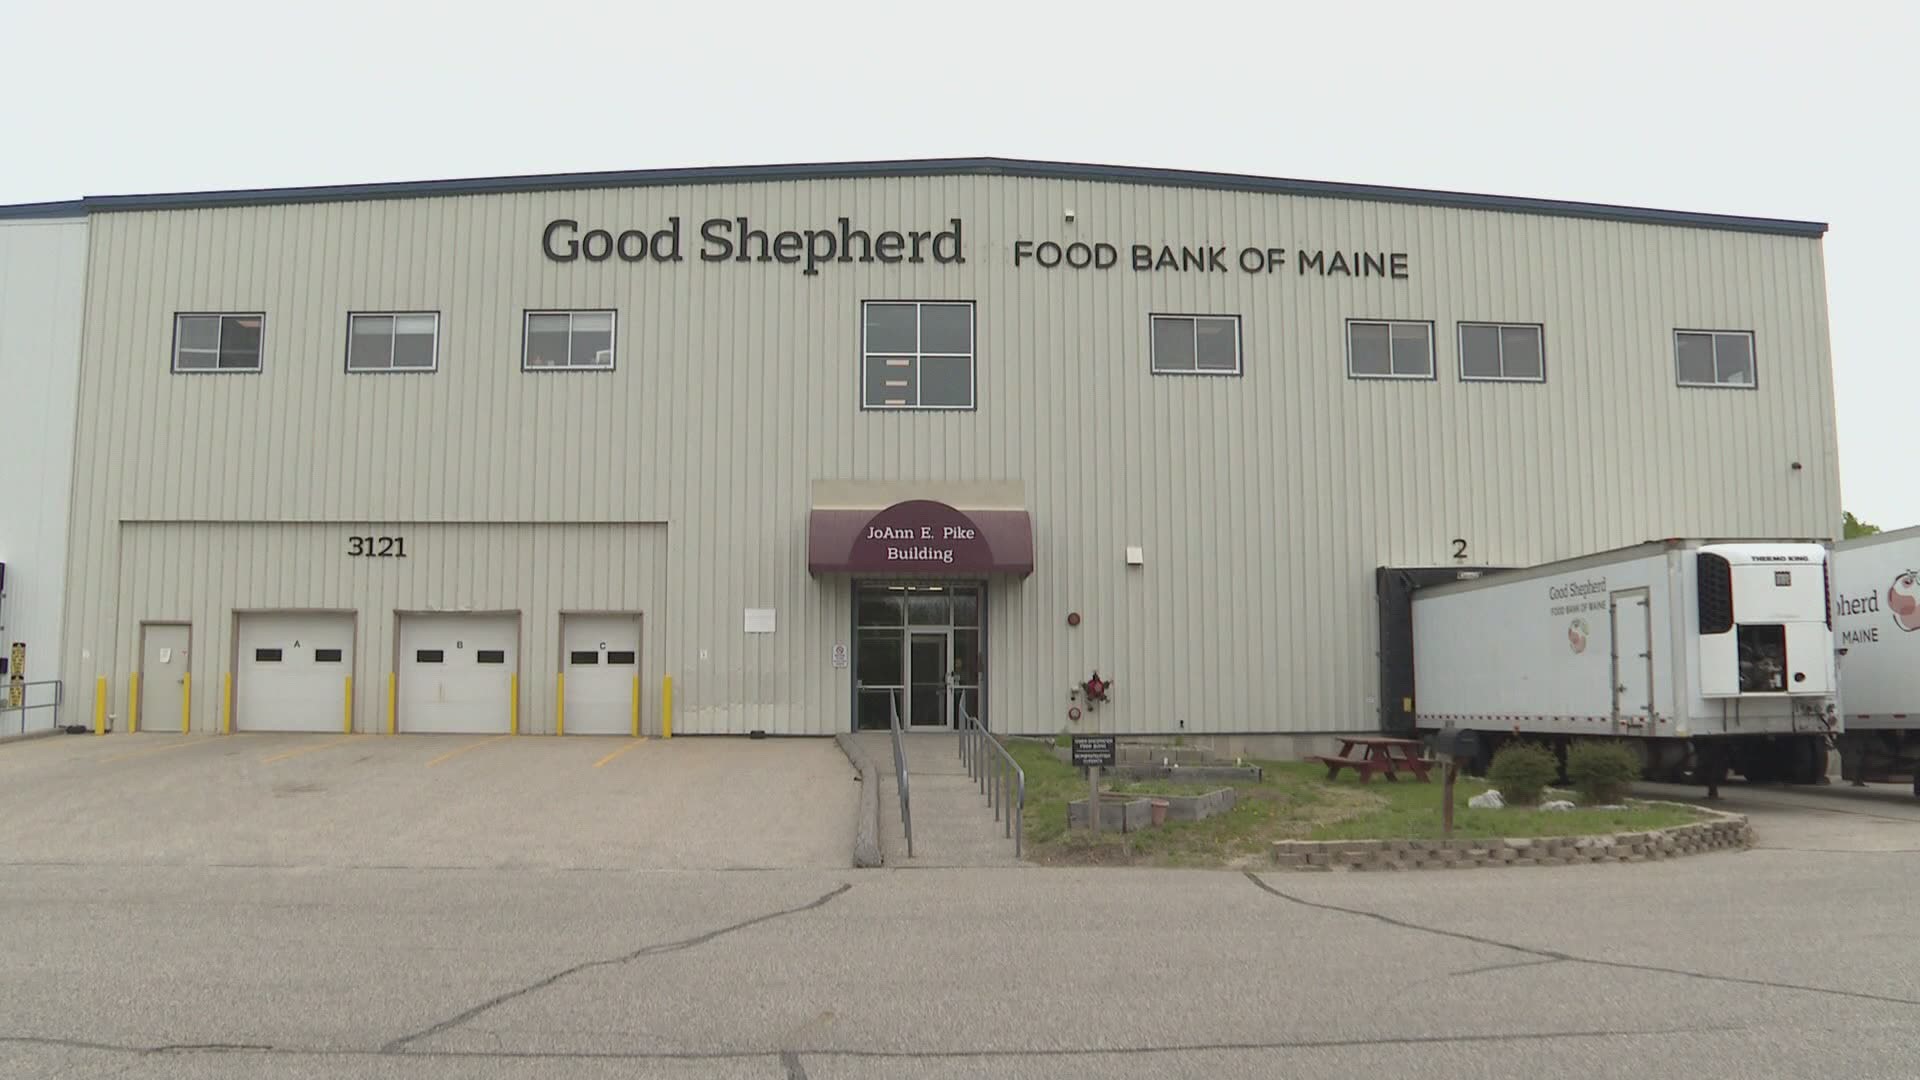 A recent survey conducted by Good Shepherd Food Bank indicated that 90 percent of the food pantries it serves are seeing an increase in people seeking help.